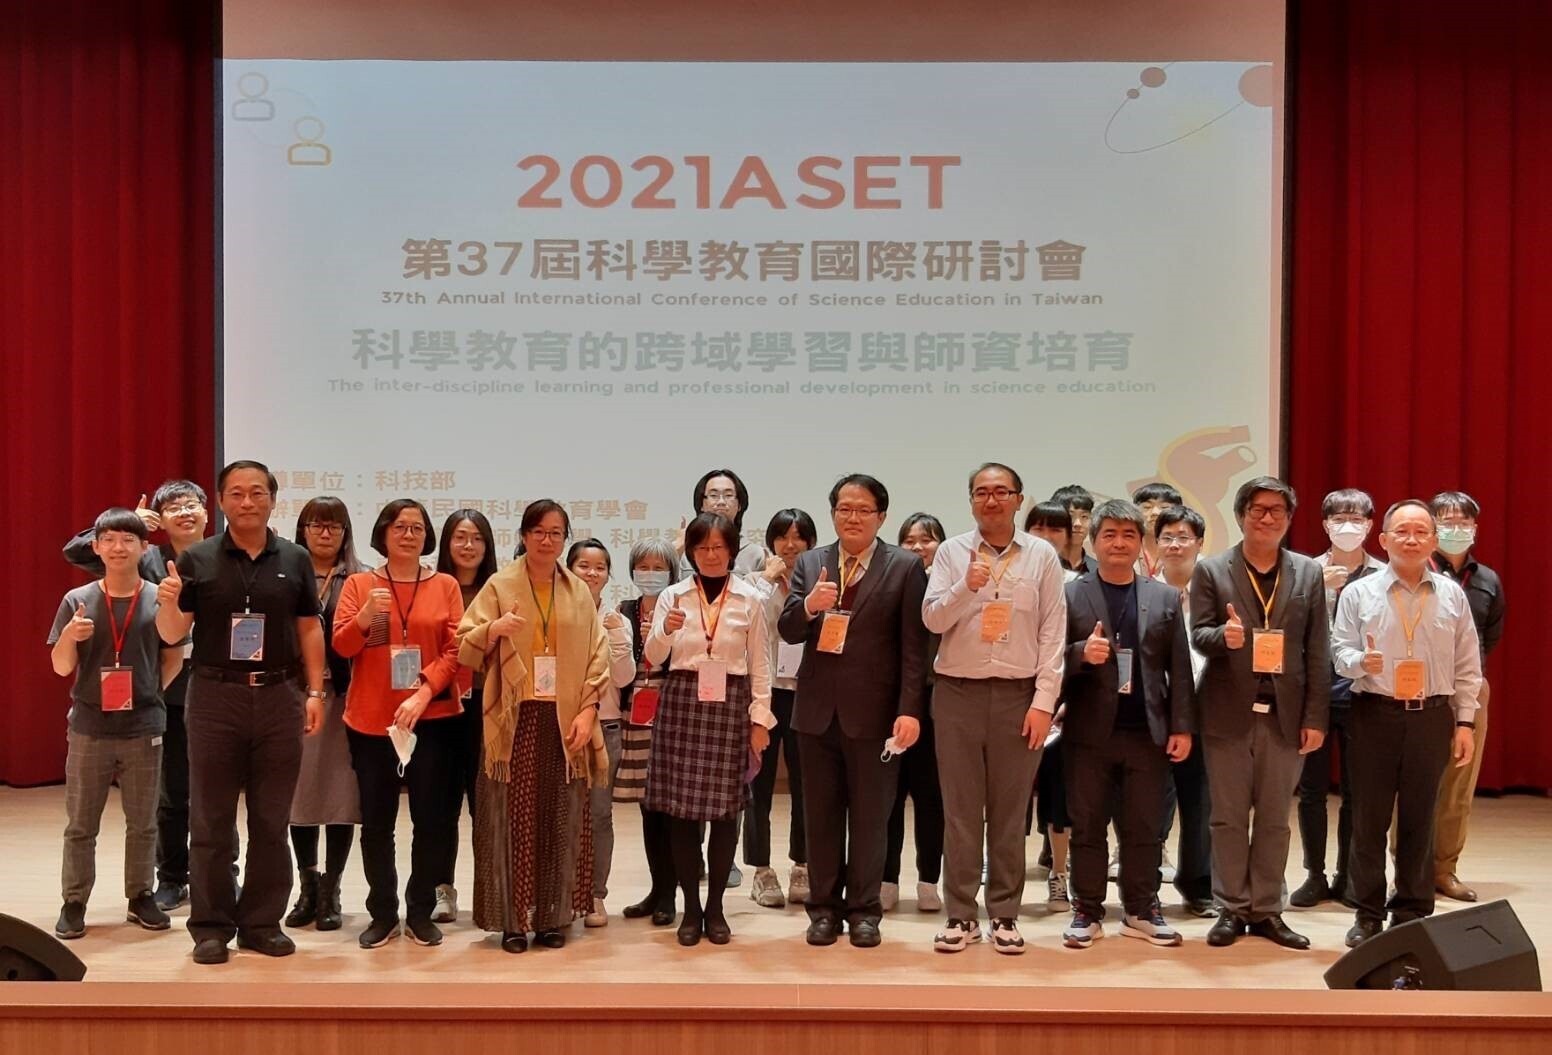 Figure 3: The 37th ASET held in 2021